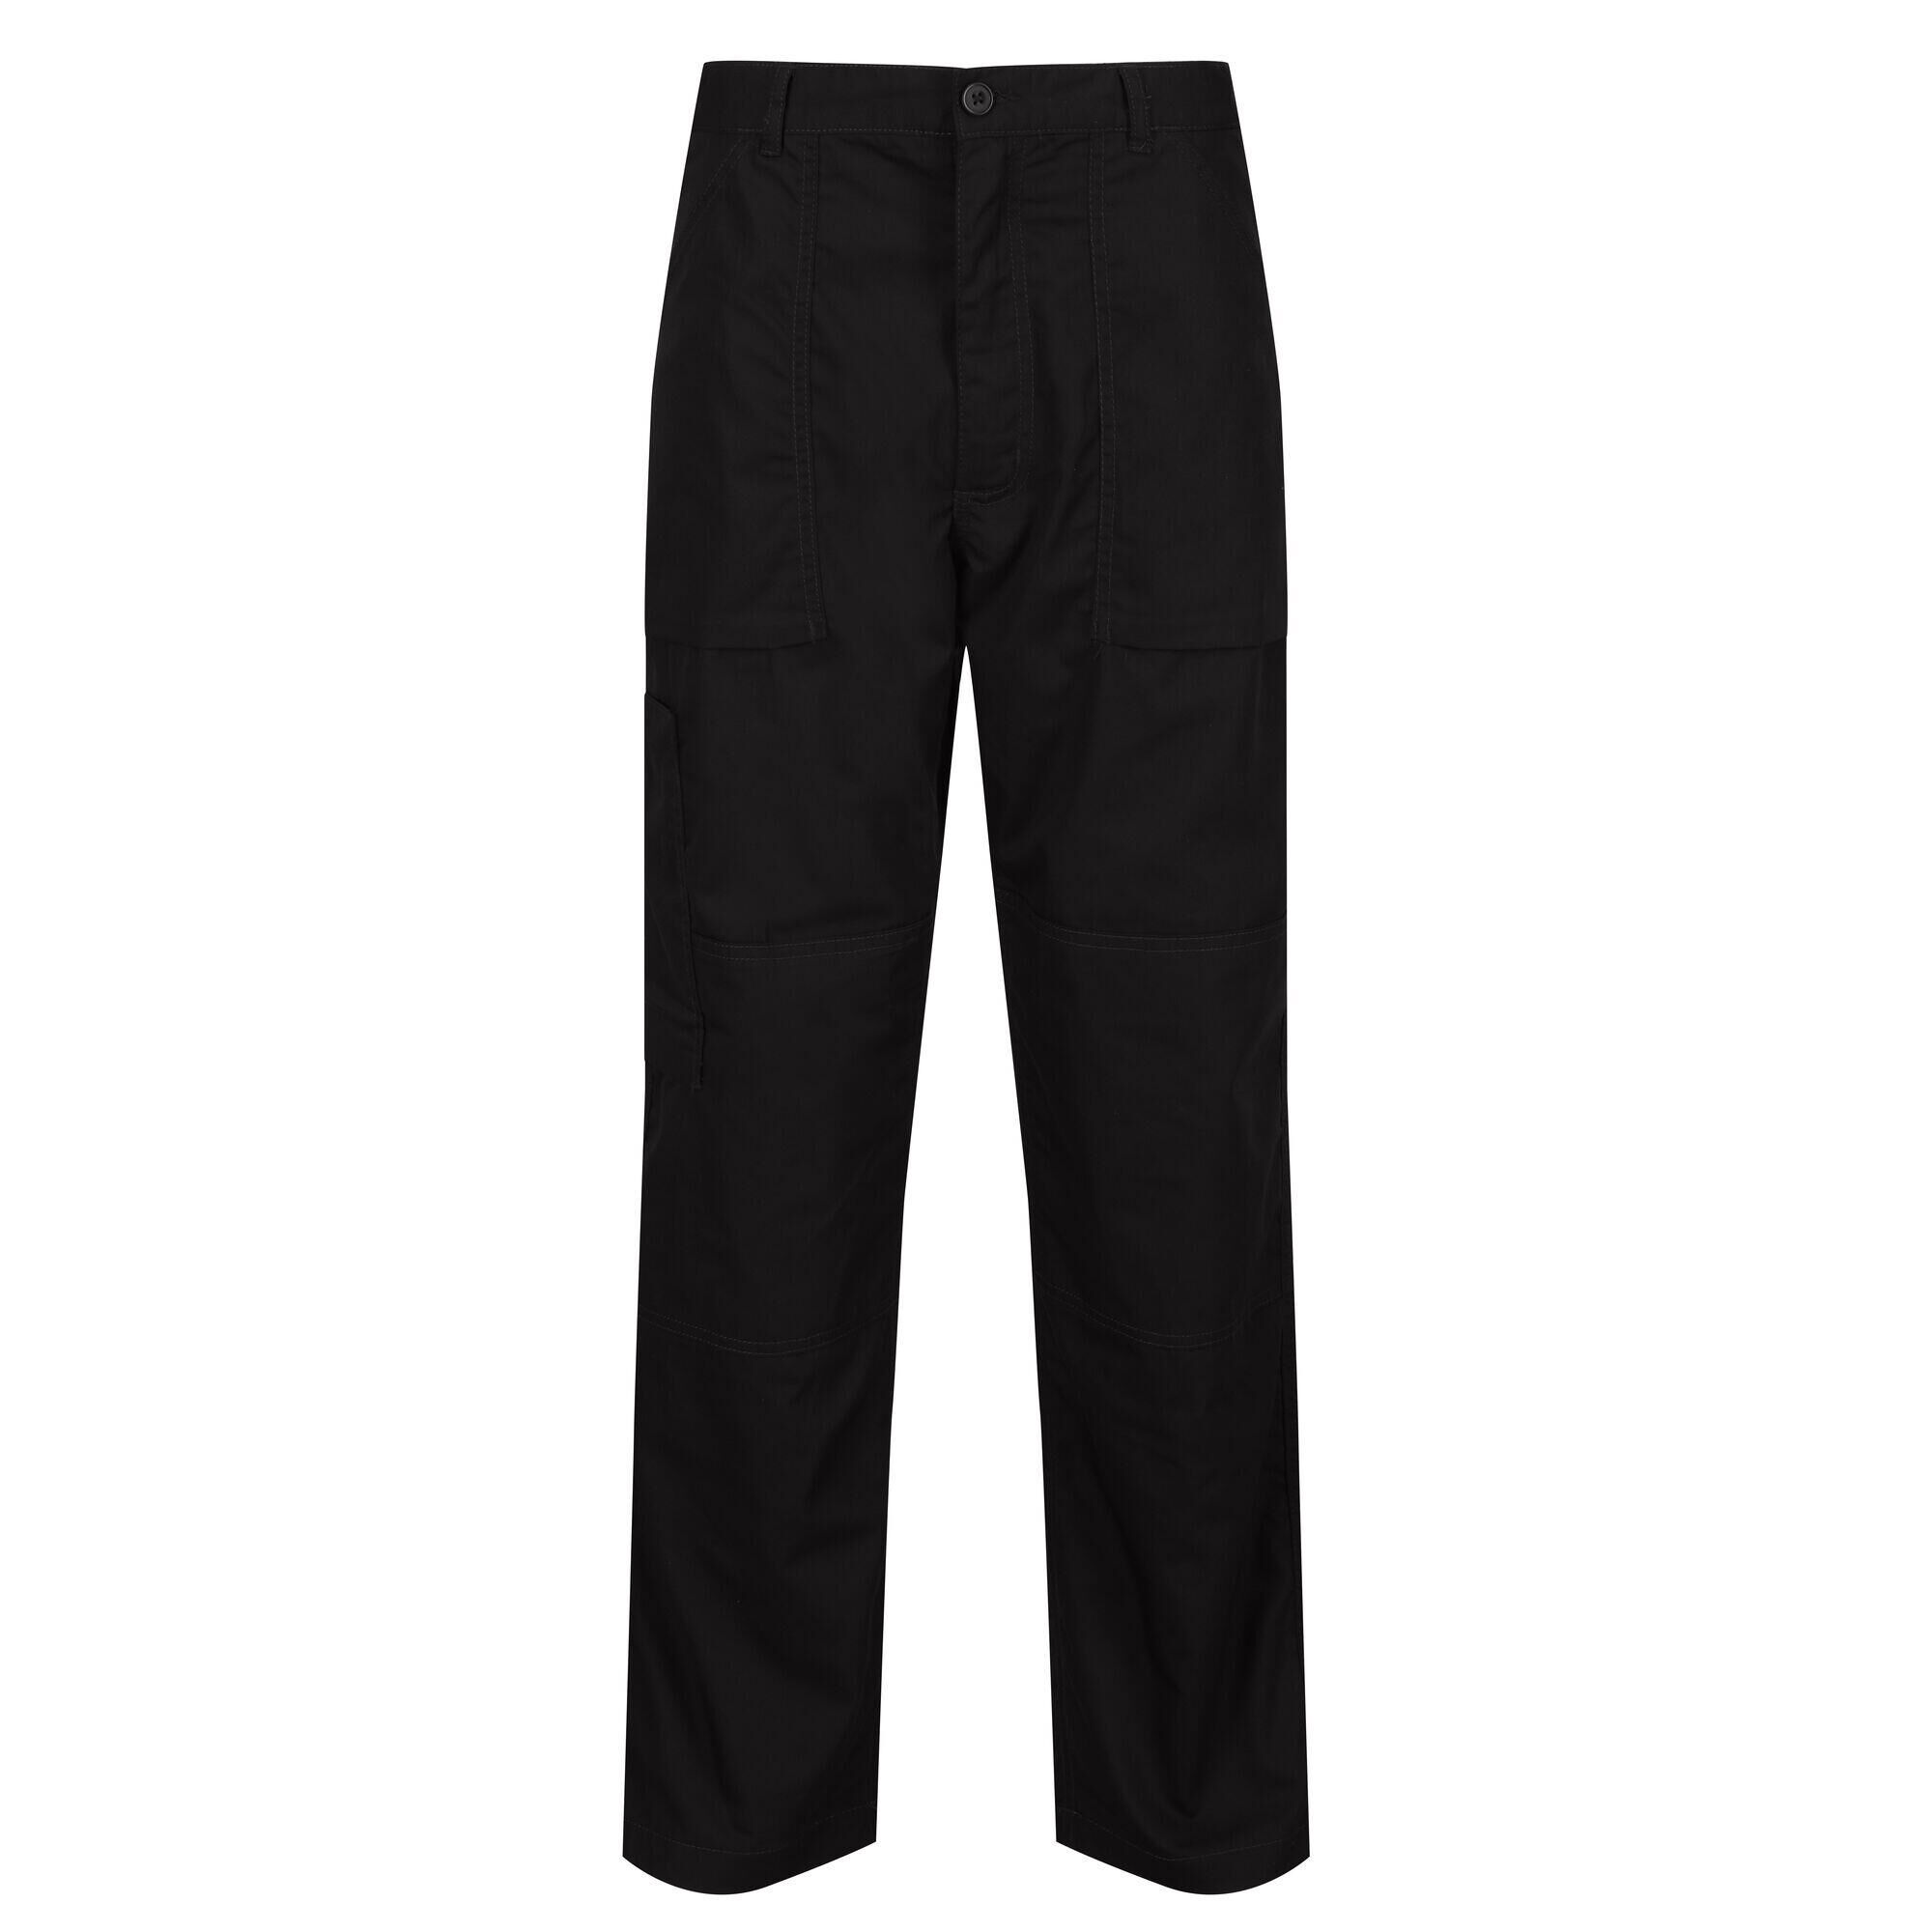 REGATTA Mens Sports New Lined Action Trousers (Black)